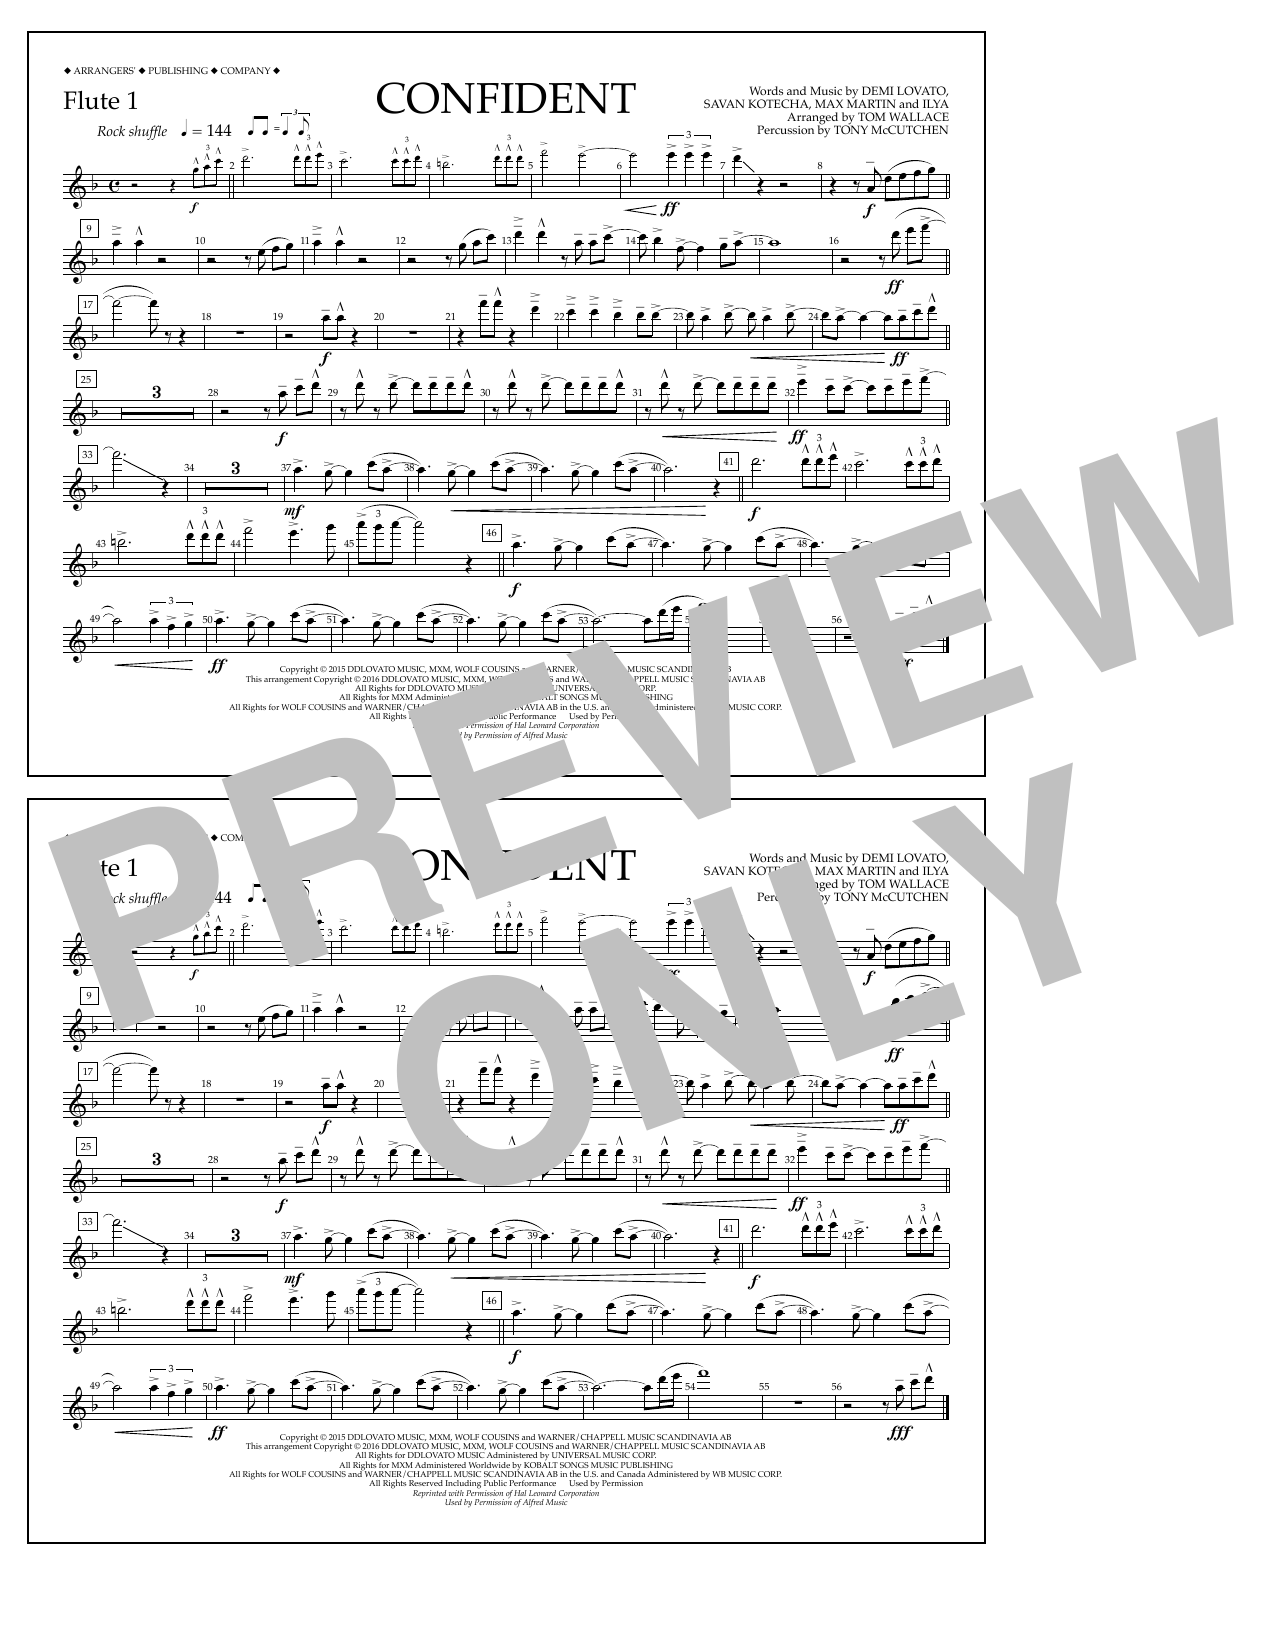 Download Tom Wallace Confident - Flute 1 Sheet Music